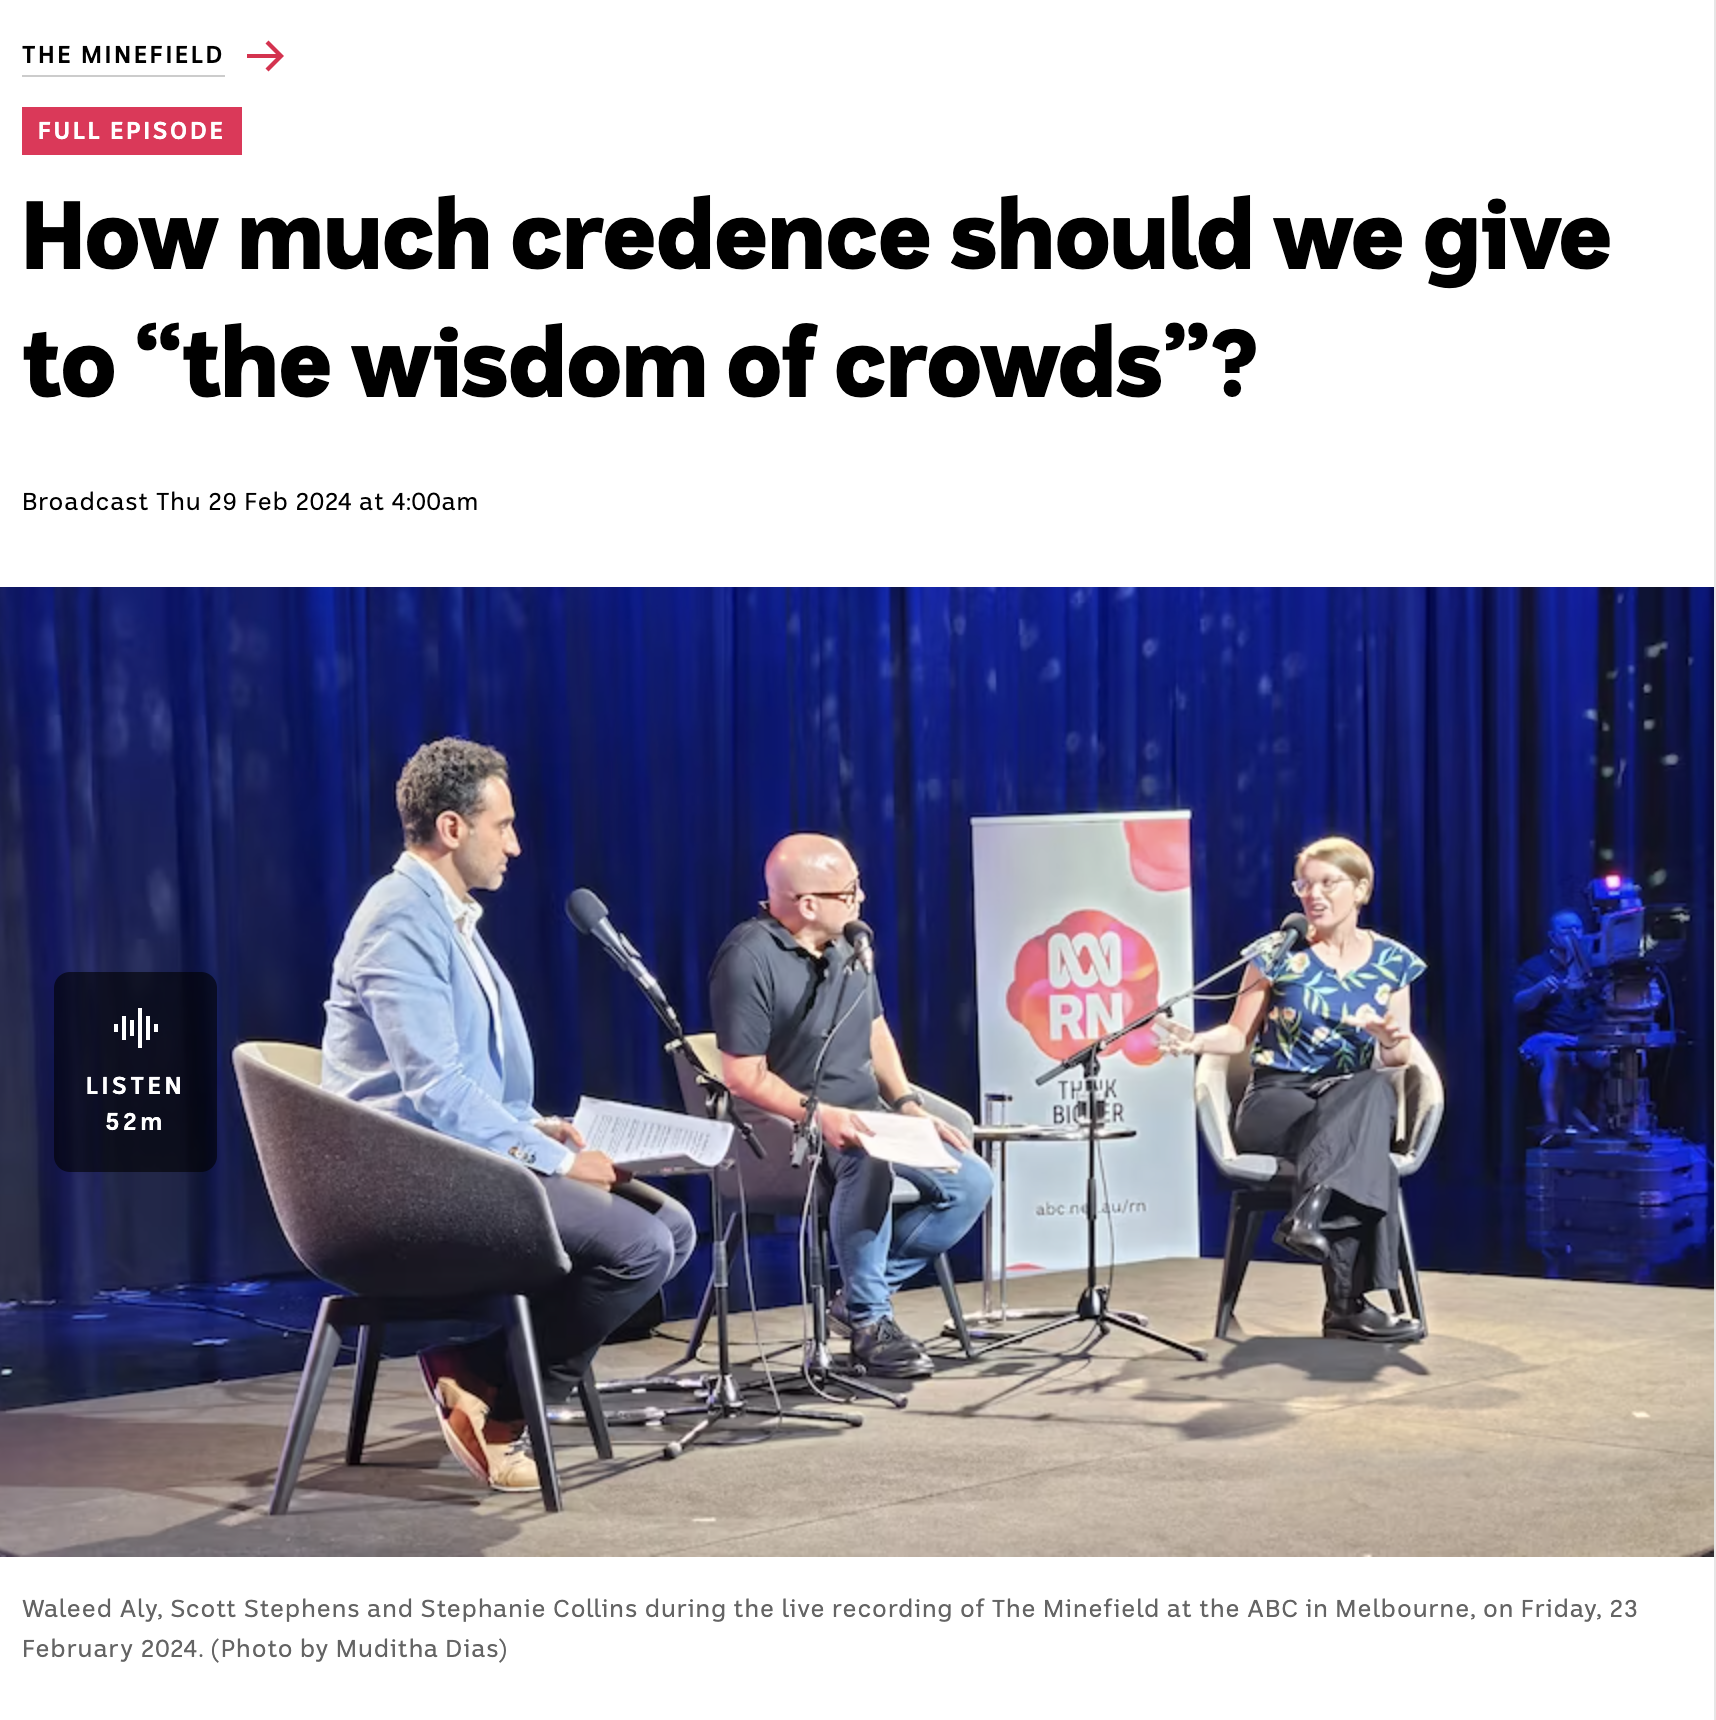 How much credence should we give crowd wisdom?